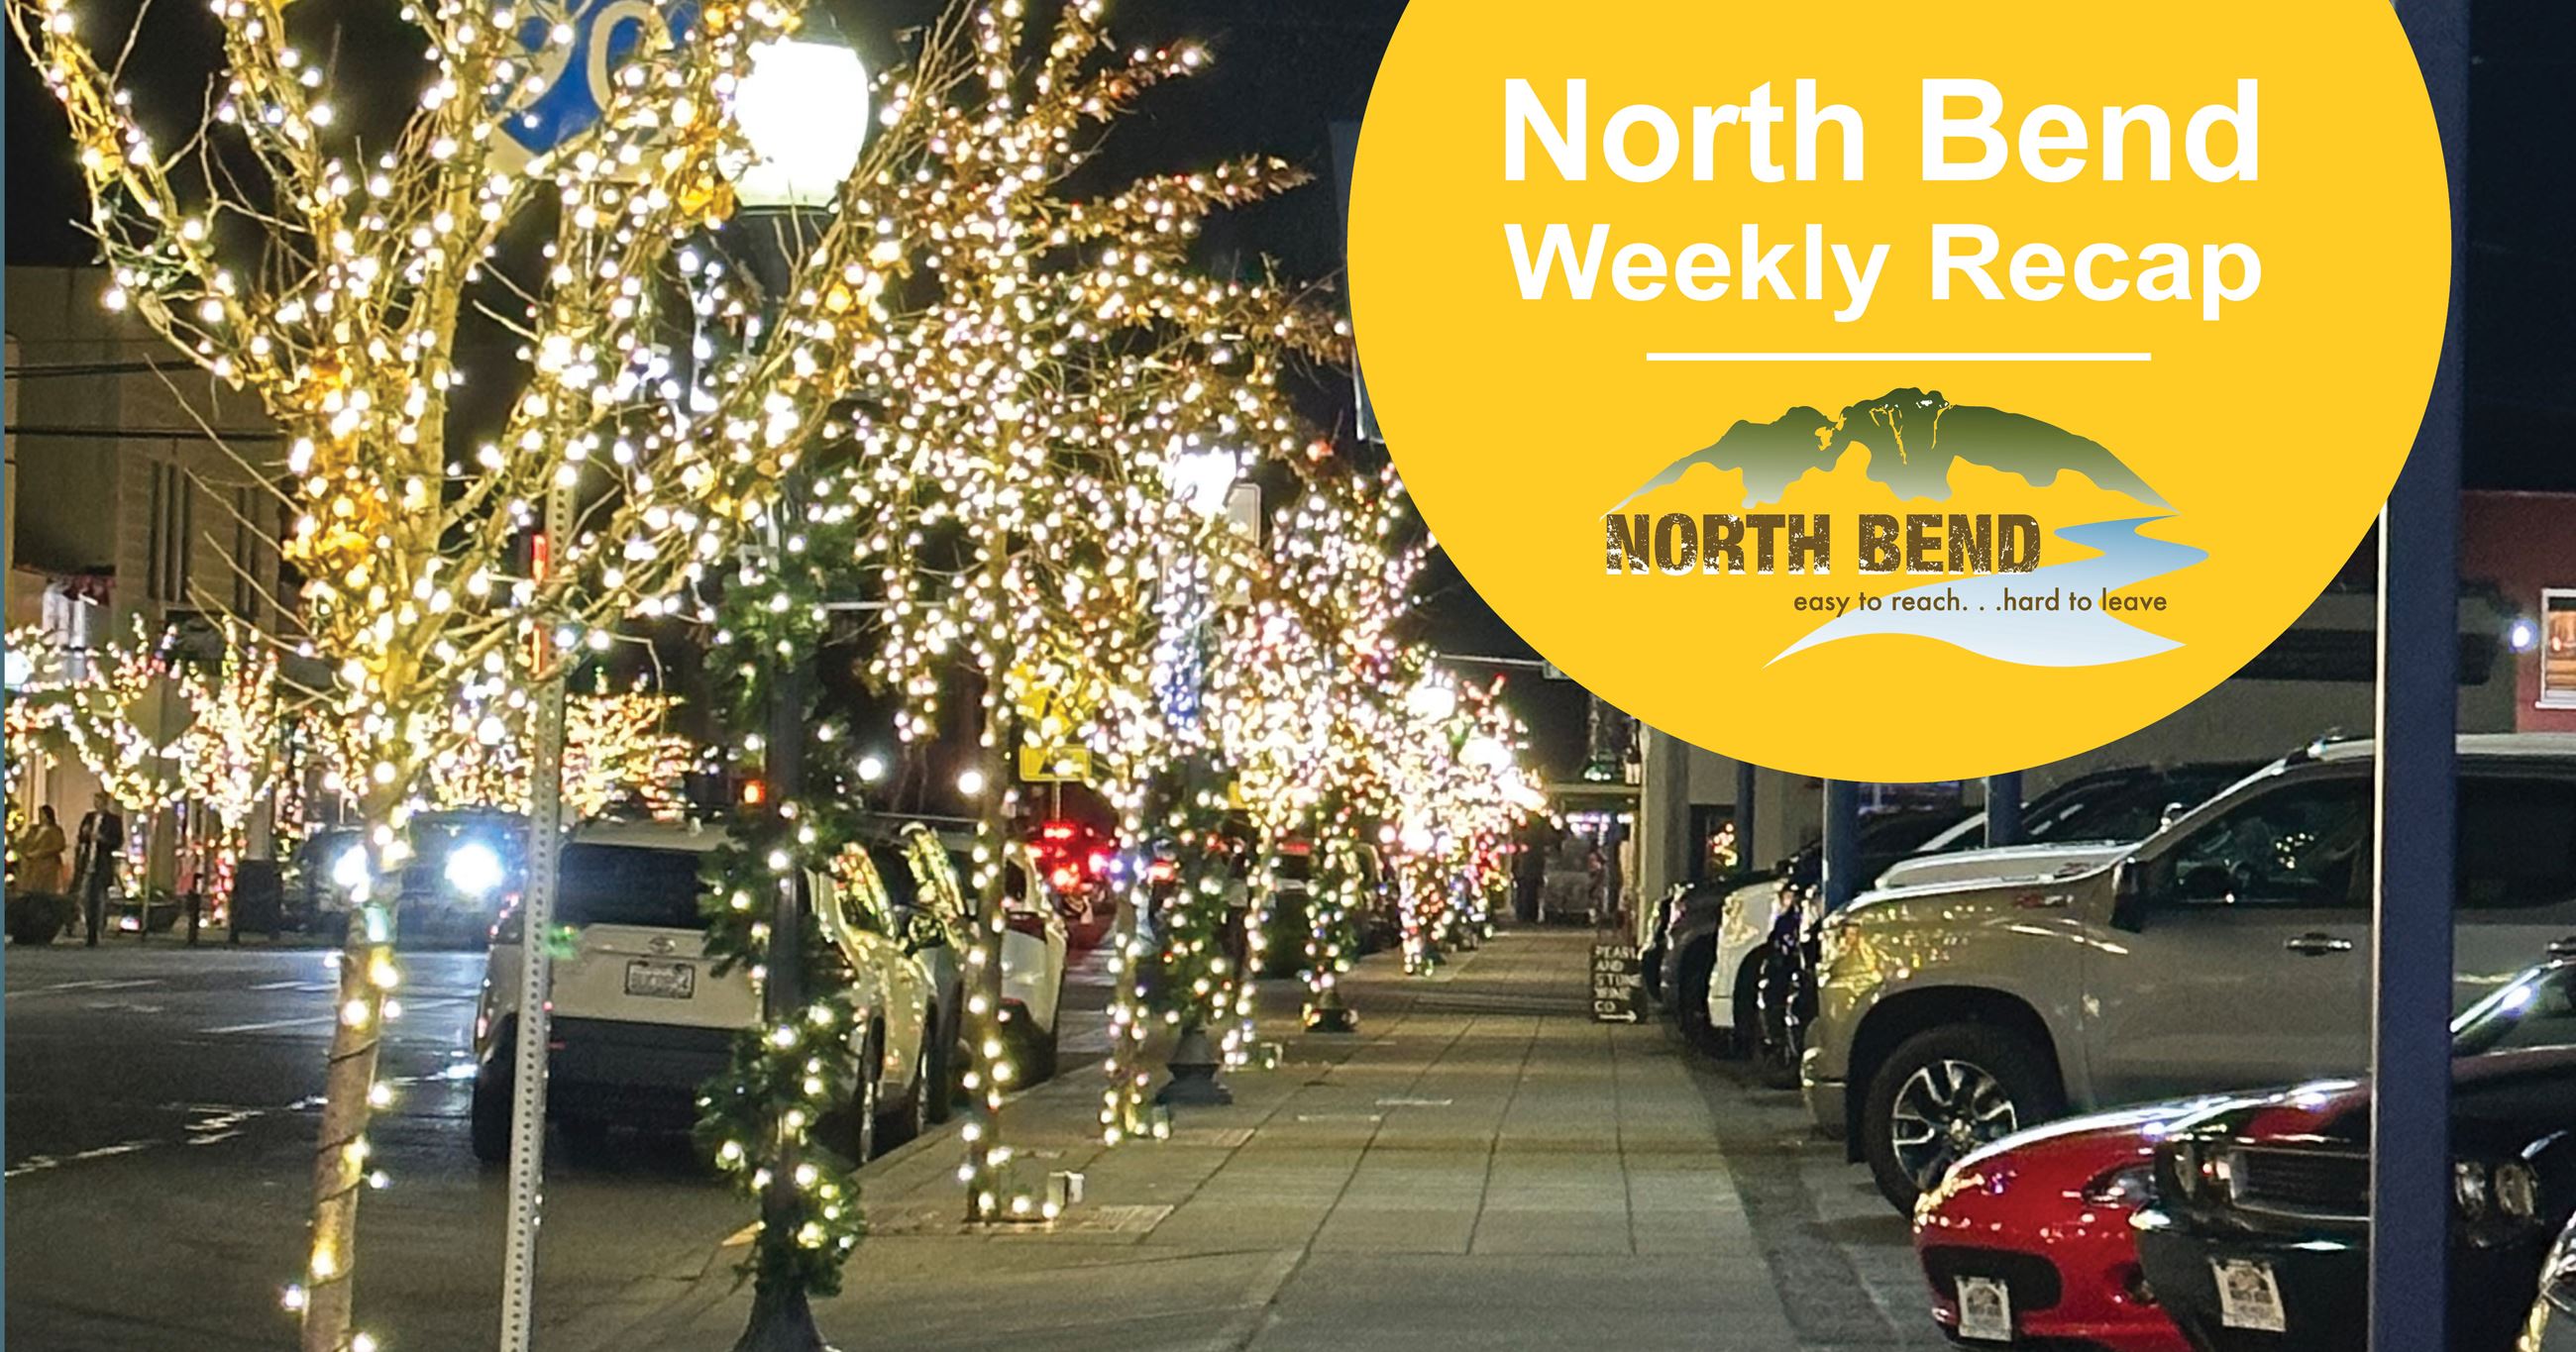  North Bend Weekly Recap: Light up NB, Holly Days, affordable housing, flood watch, and more 